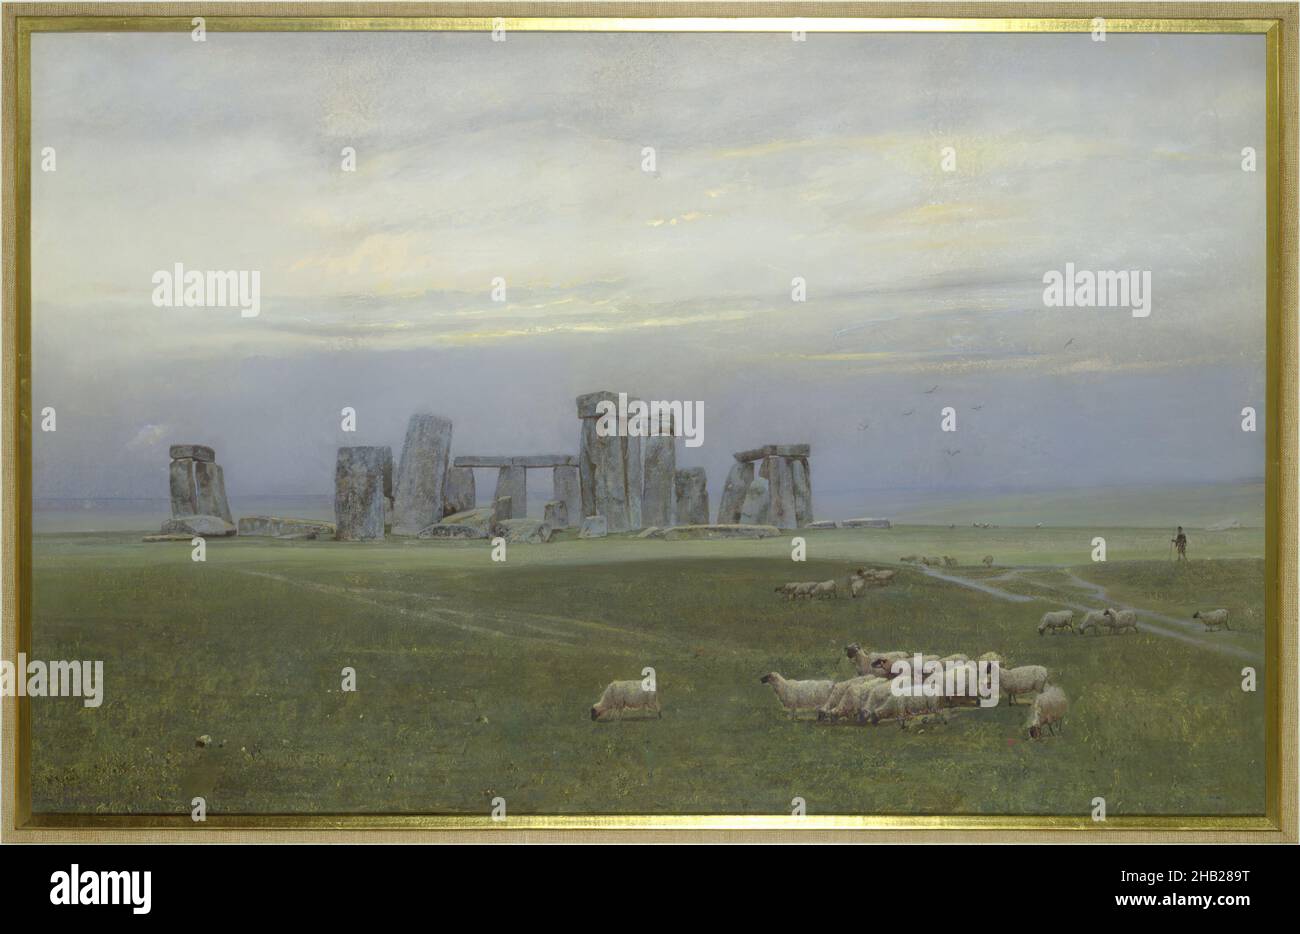 Stonehenge, William Trost Richards, American, 1833-1905, Opaque watercolor and pastel on wove paper, 23 1/8 × 36 3/8 in., 58.7 × 92.4 cm, agrarian, Amesbury, ancient, archaelology, architecture, astronomy, Britons, Bronze Age, calendar, construction, druid, engineering, England, folklore, grazing, Great Britain, meadow, megalithic, Merlin, Neolithic, Old England, pagan, pasture, religion, ritual, sheep Stock Photo